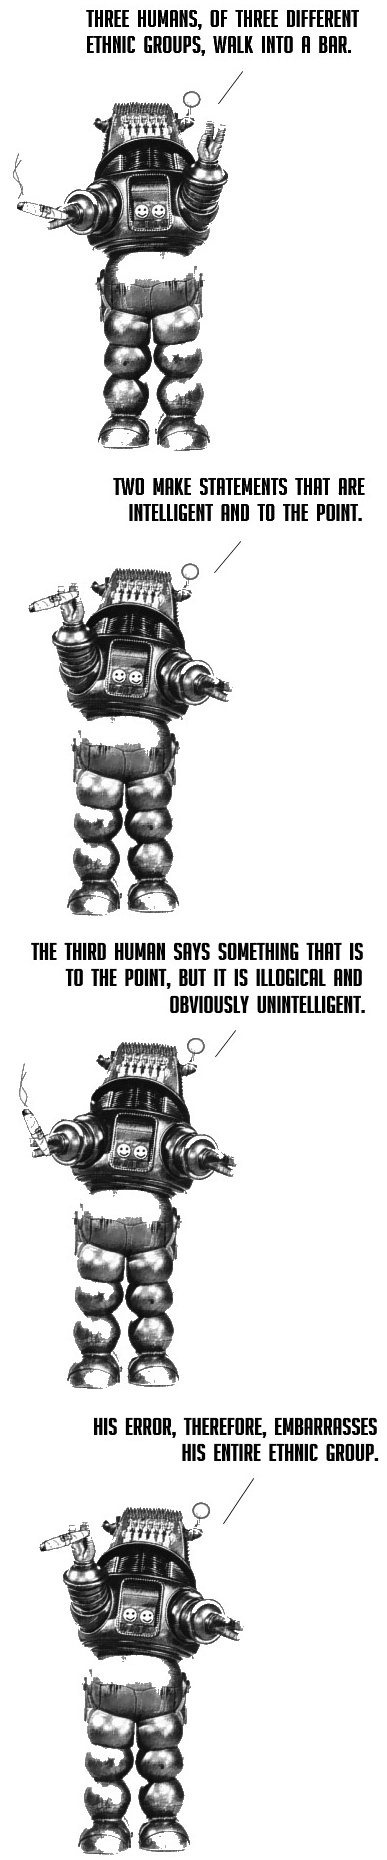 Robot telling a joke: "Three humans, of three different ethnic groups, walk into a bar. Two make statements that are intelligent and to the point. The third human says something that is to the point, but it is illogical and obviously unintelligent. His error, therefore, embarrasses his entire enthnic group."